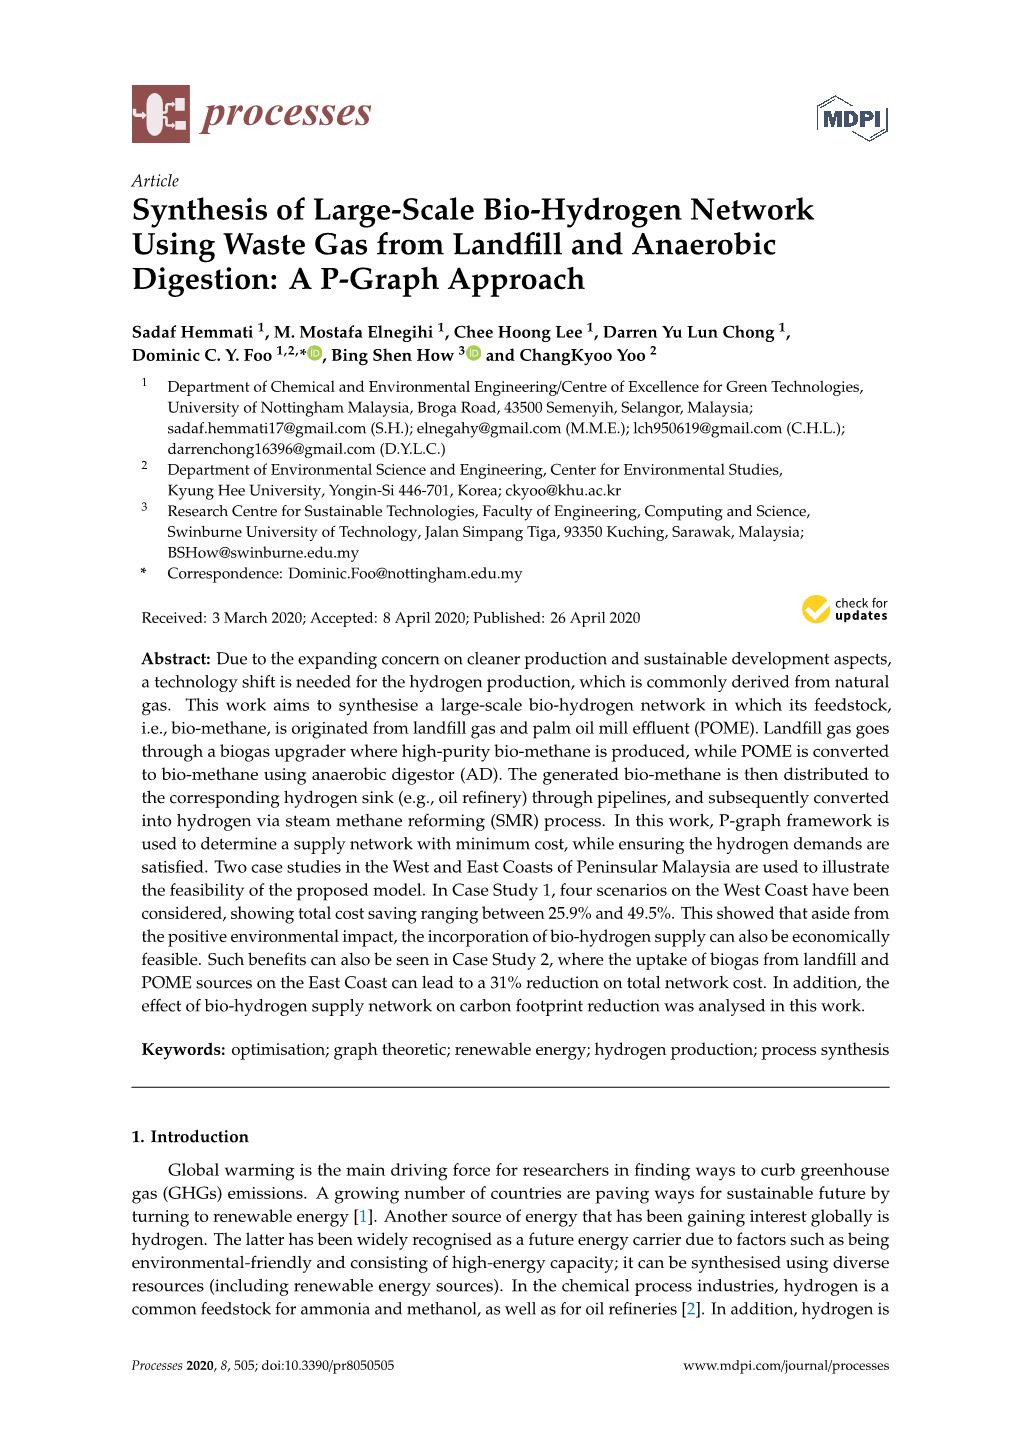 Synthesis of Large-Scale Bio-Hydrogen Network Using Waste Gas from Landfill and Anaerobic Digestion: a P-Graph Approach